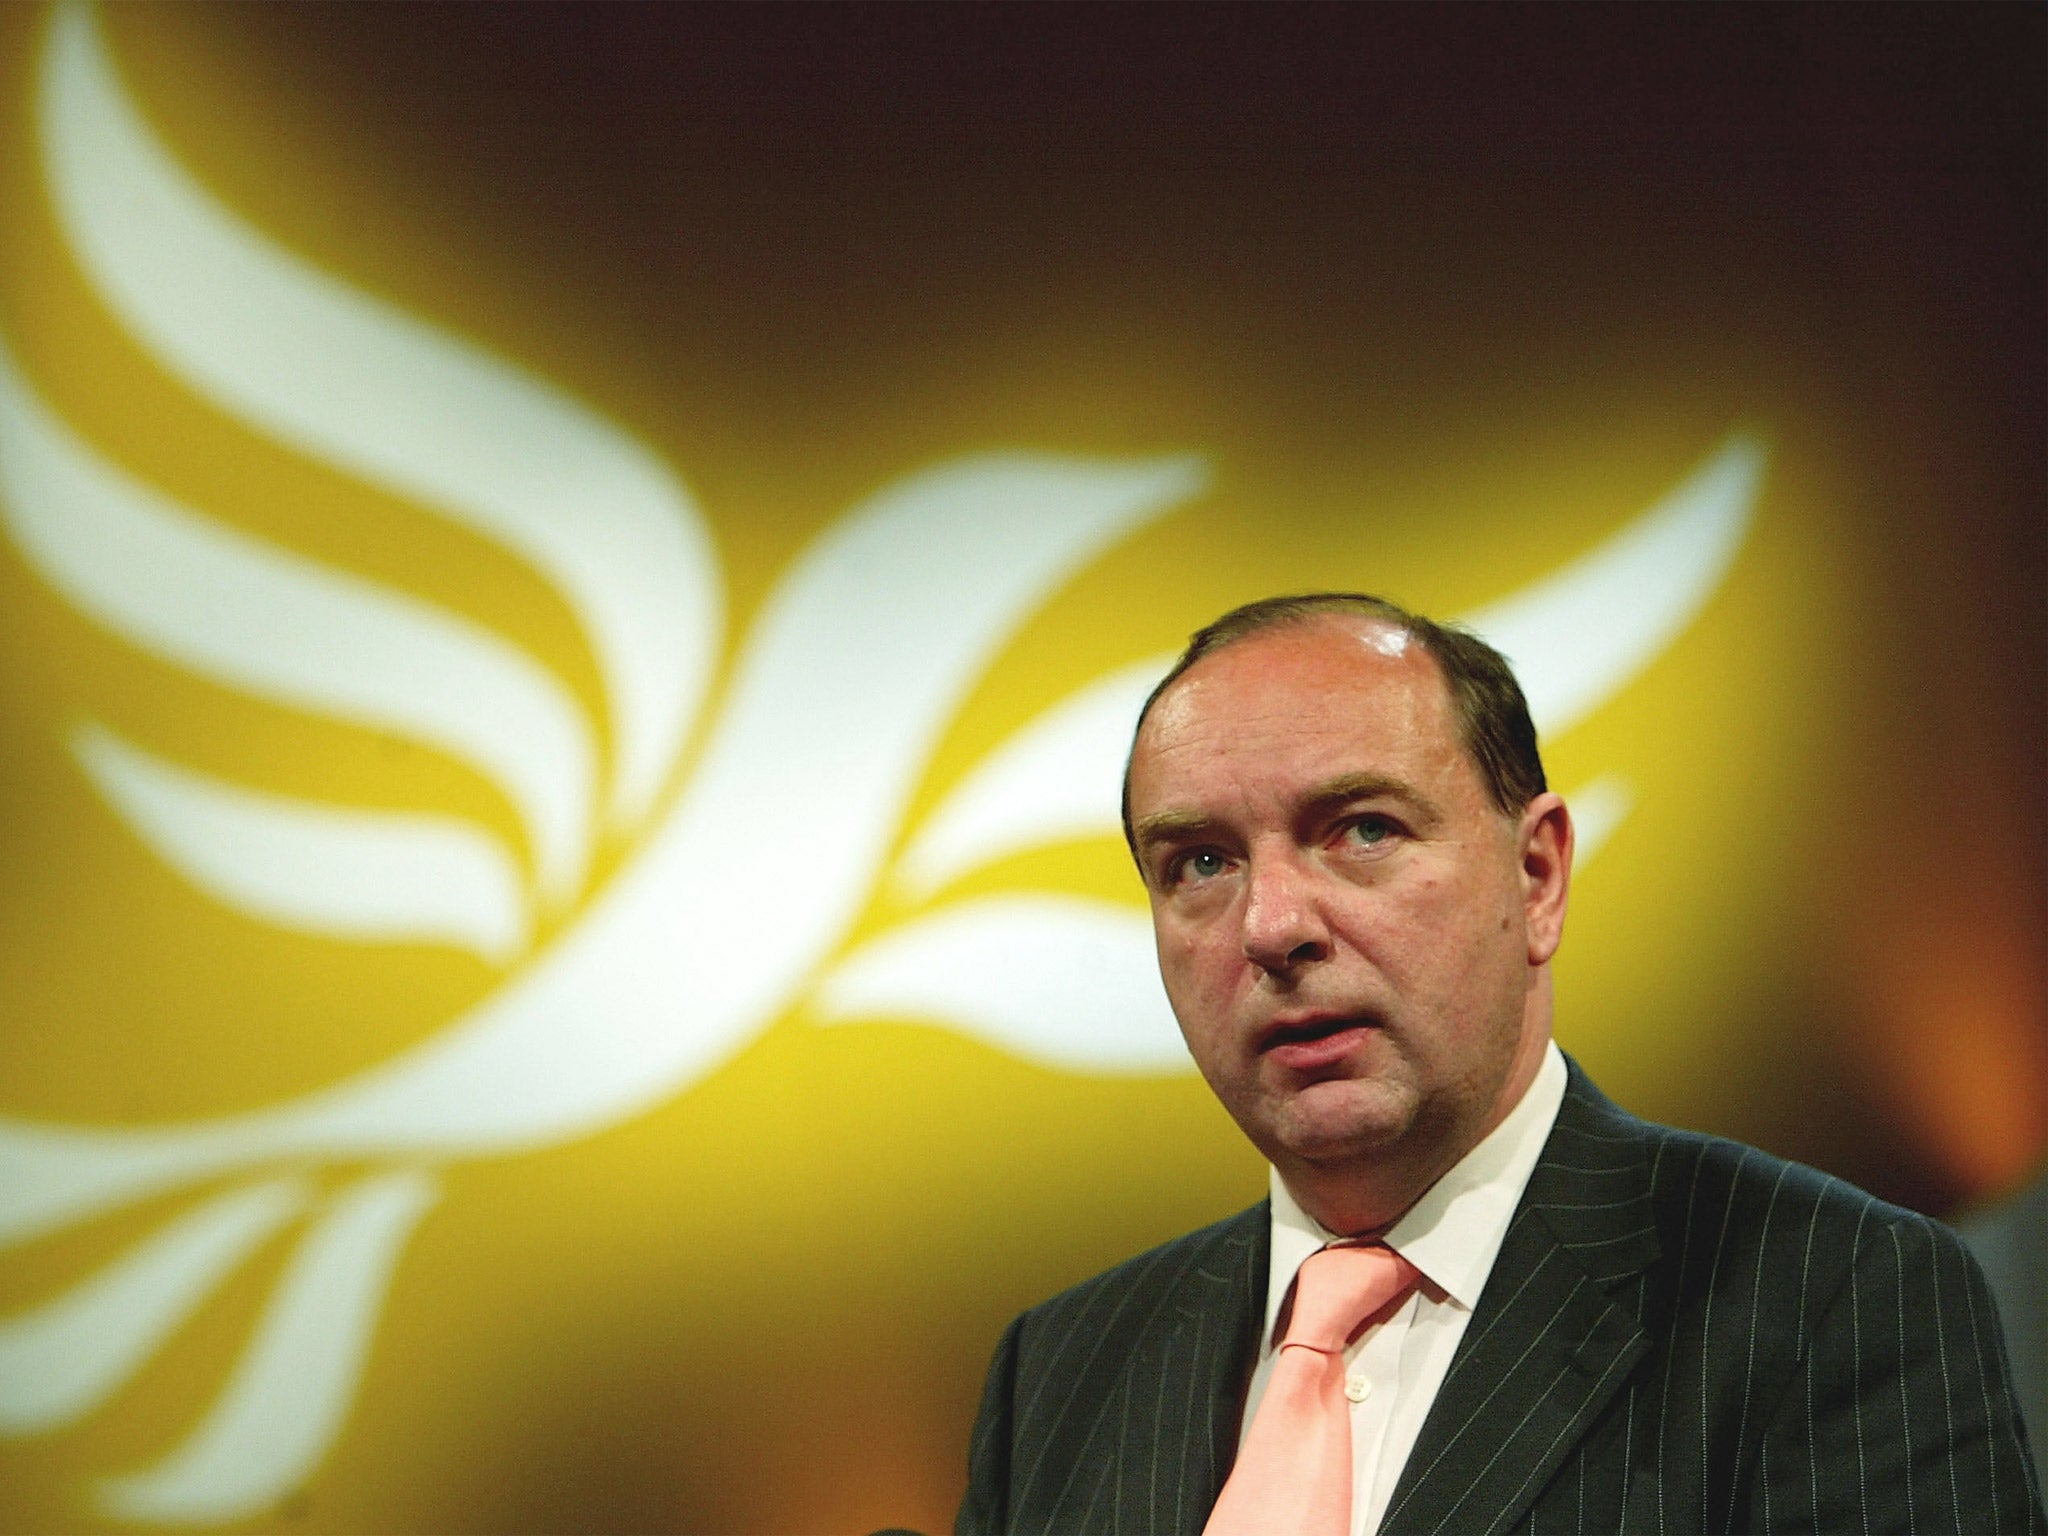 Norman Baker is at the top of the members' list of good performers